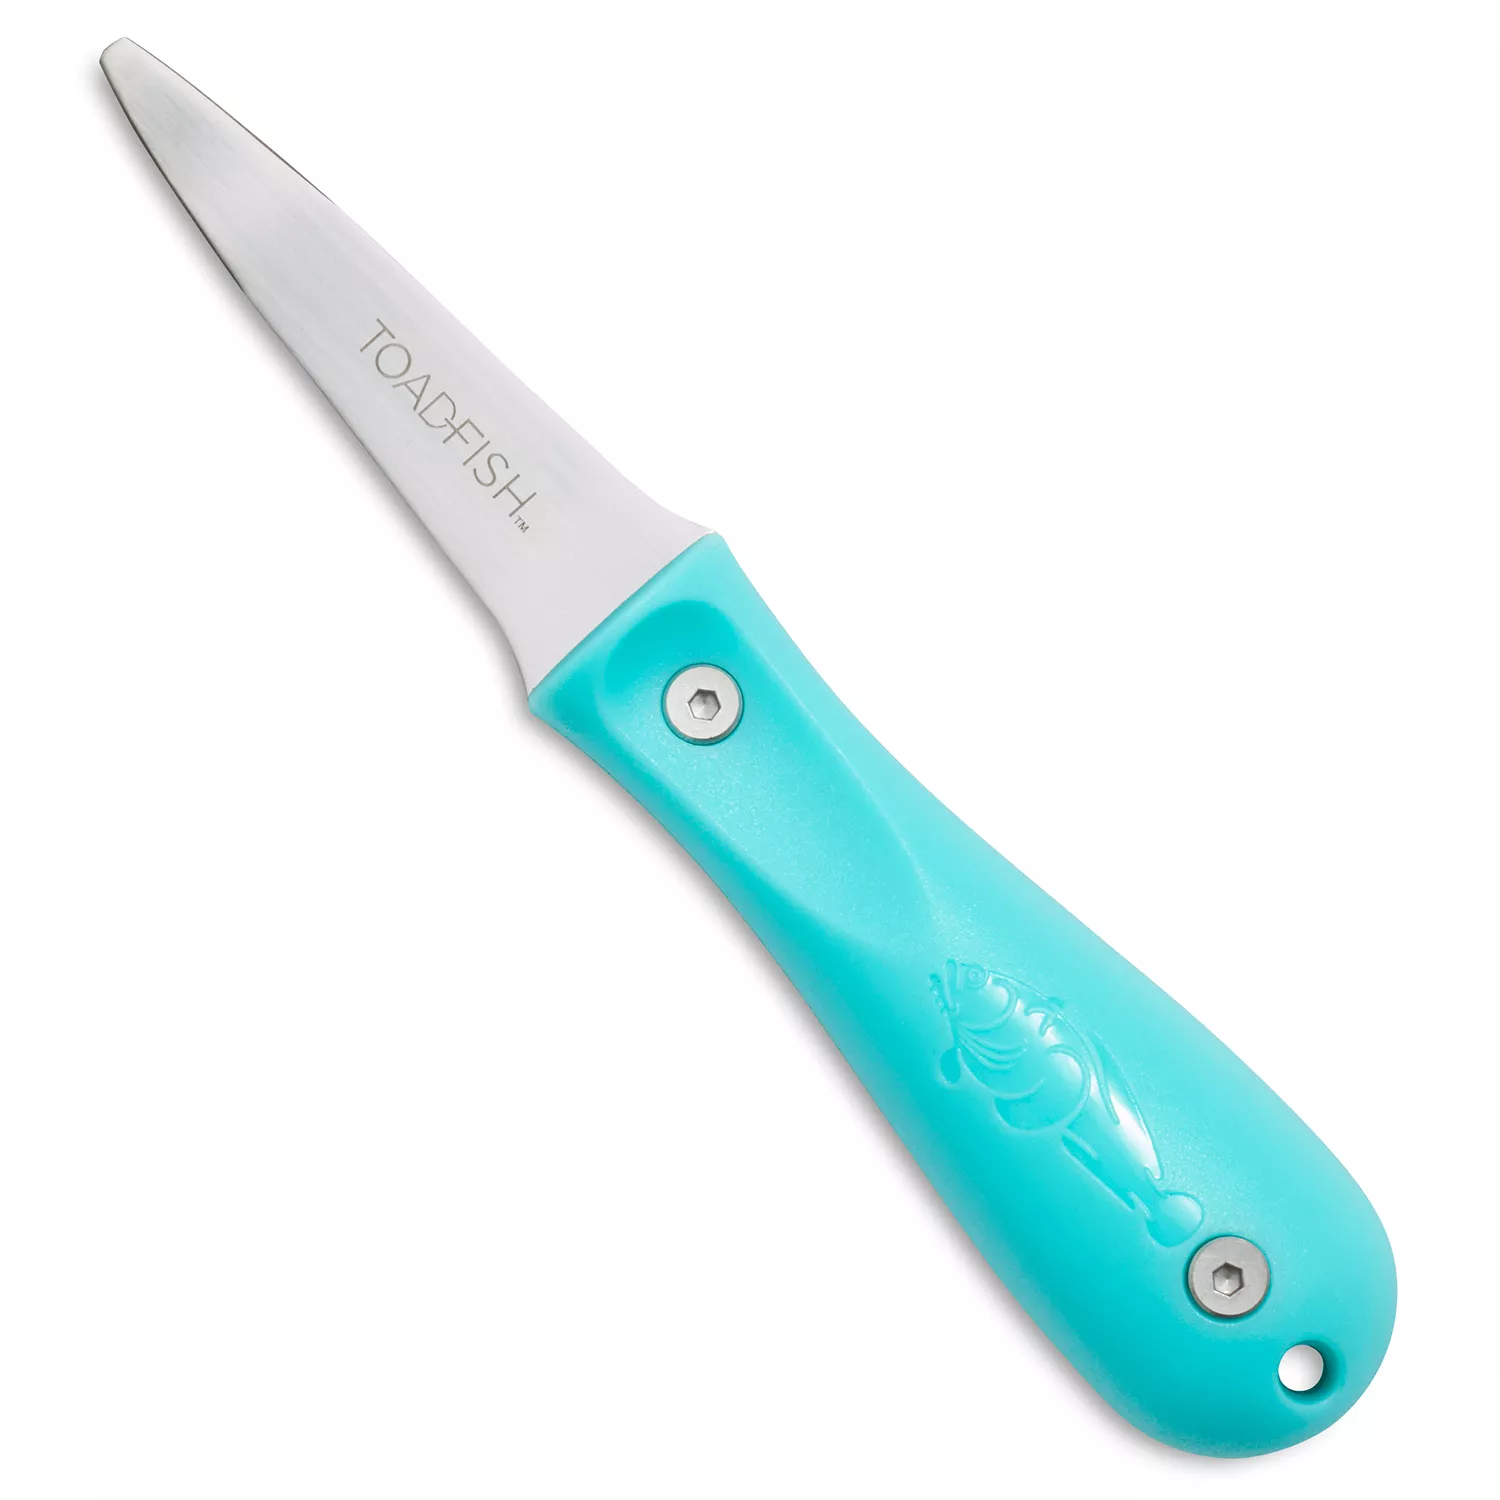 Toadfish Outfitters Oyster Knife